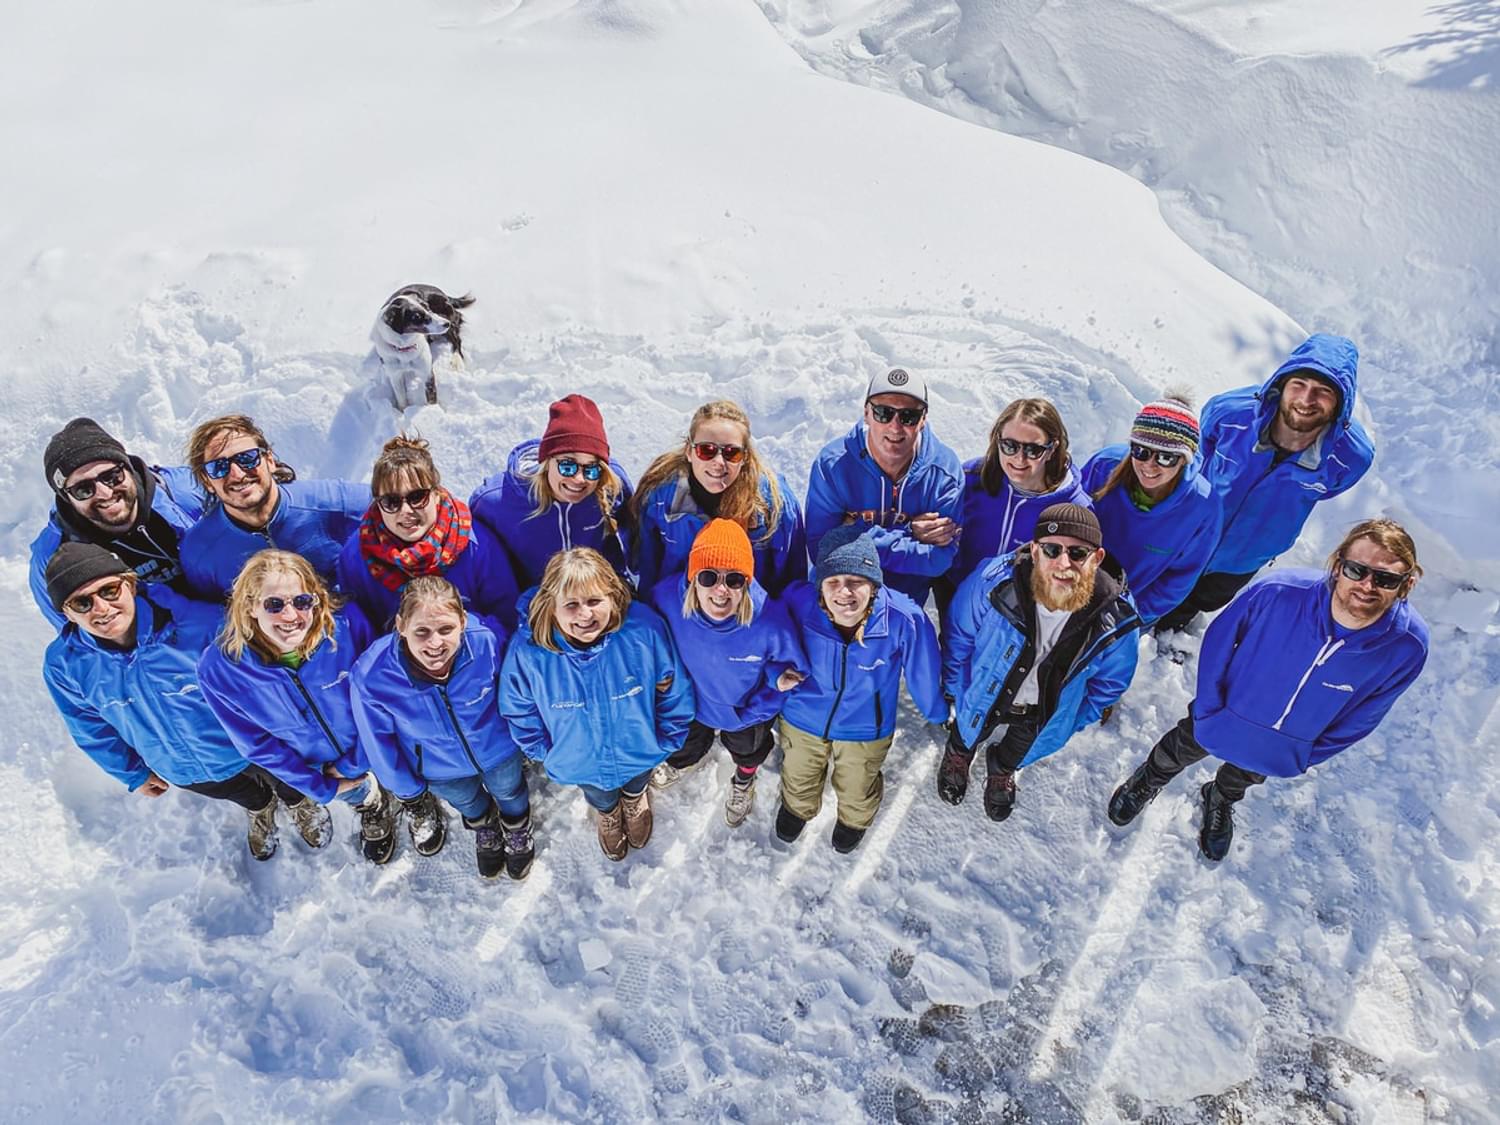 Photo of the Go Montgenevre team in the snow with Daisy the dog.